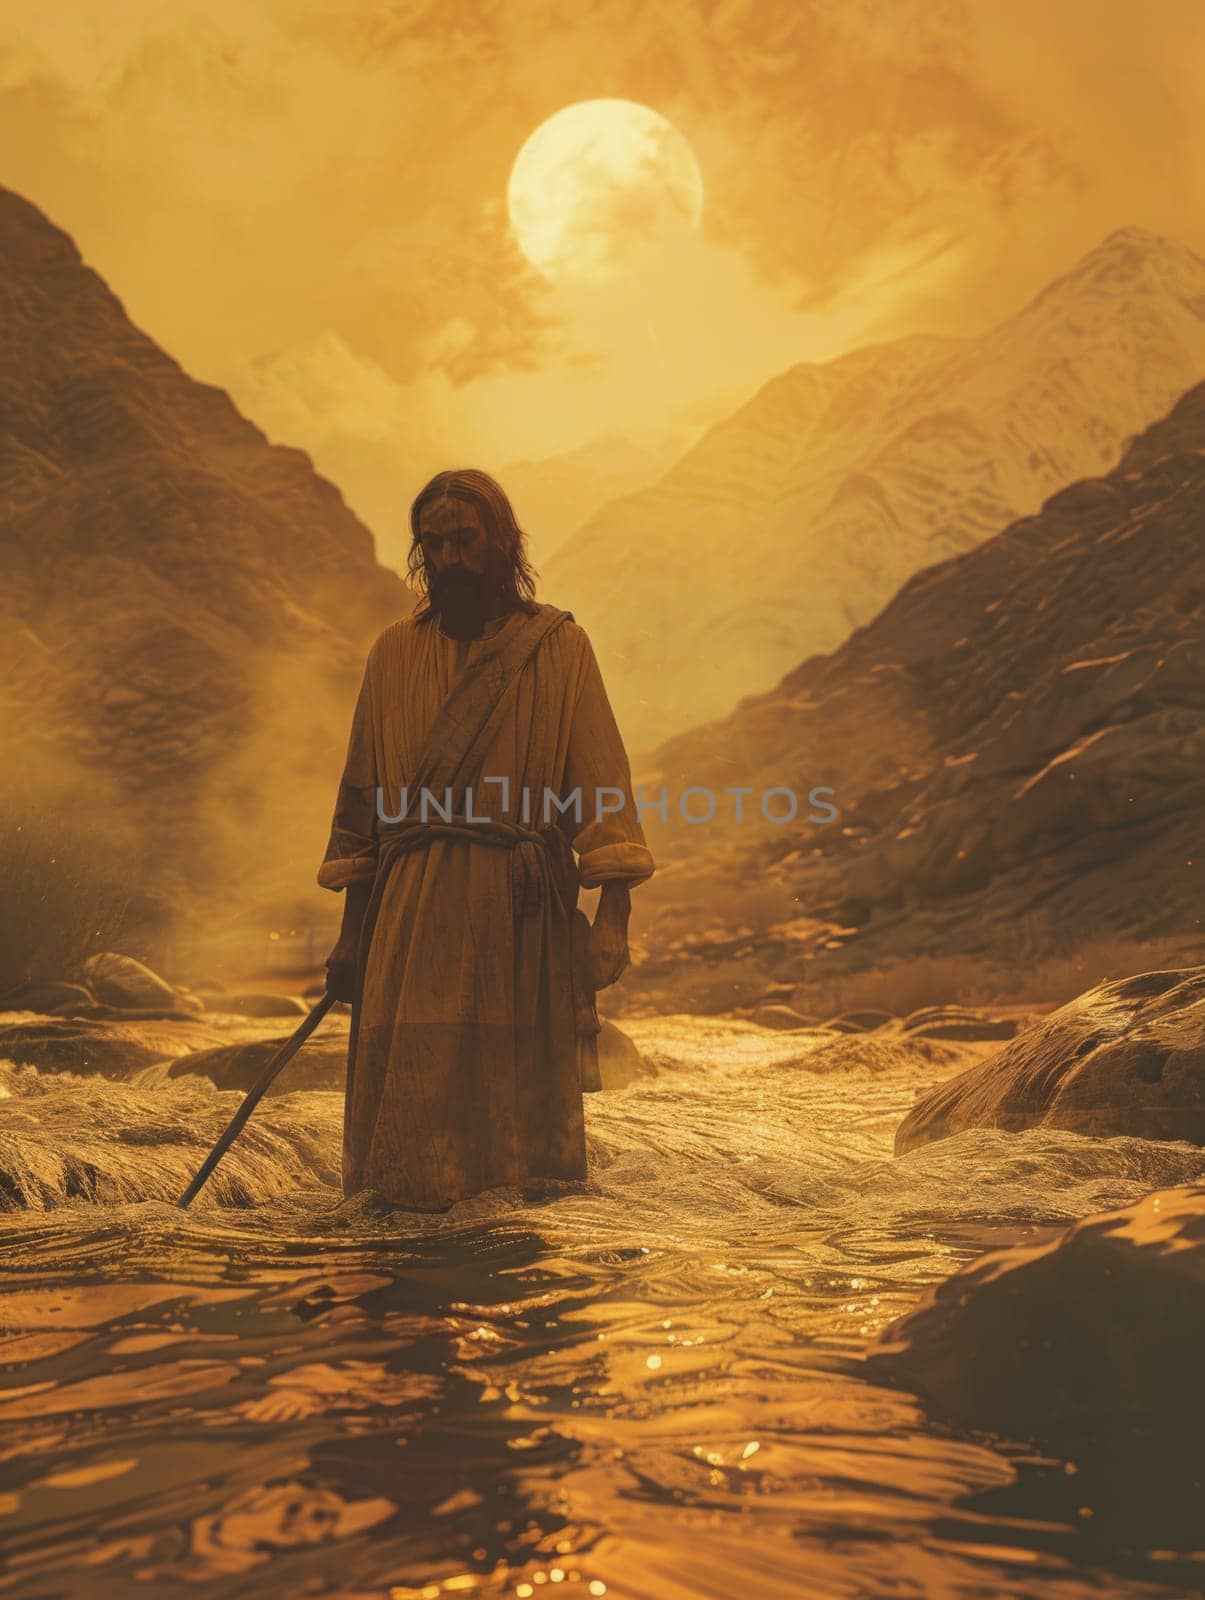 A man stands in a river, holding a sword with the sun shining behind him.